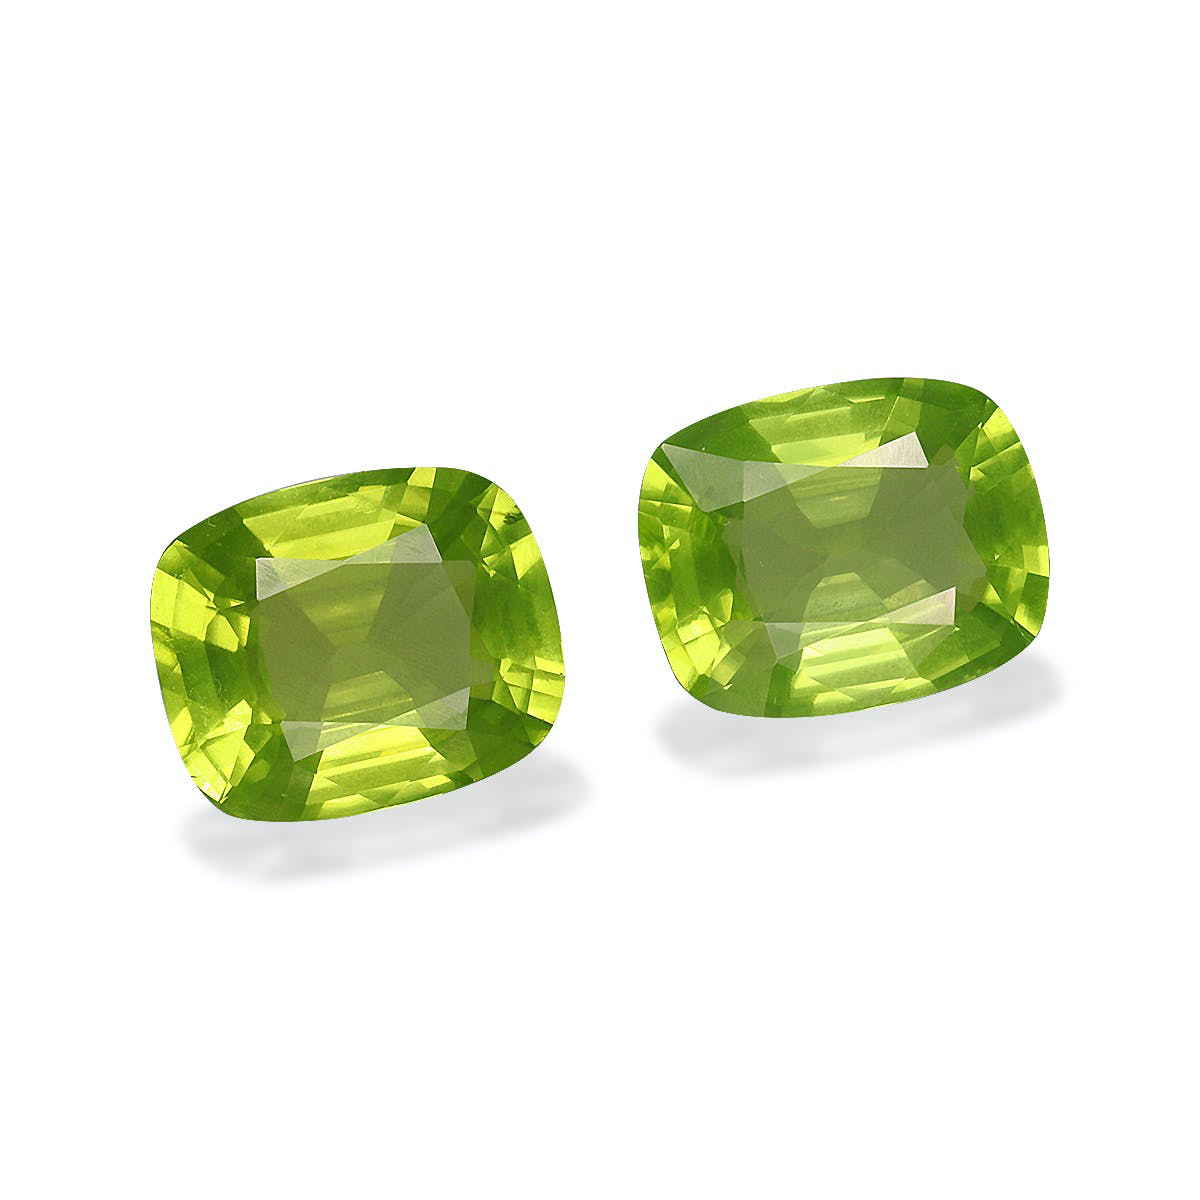 Picture of Lime Green Peridot 6.17ct - Pair (PD0086)